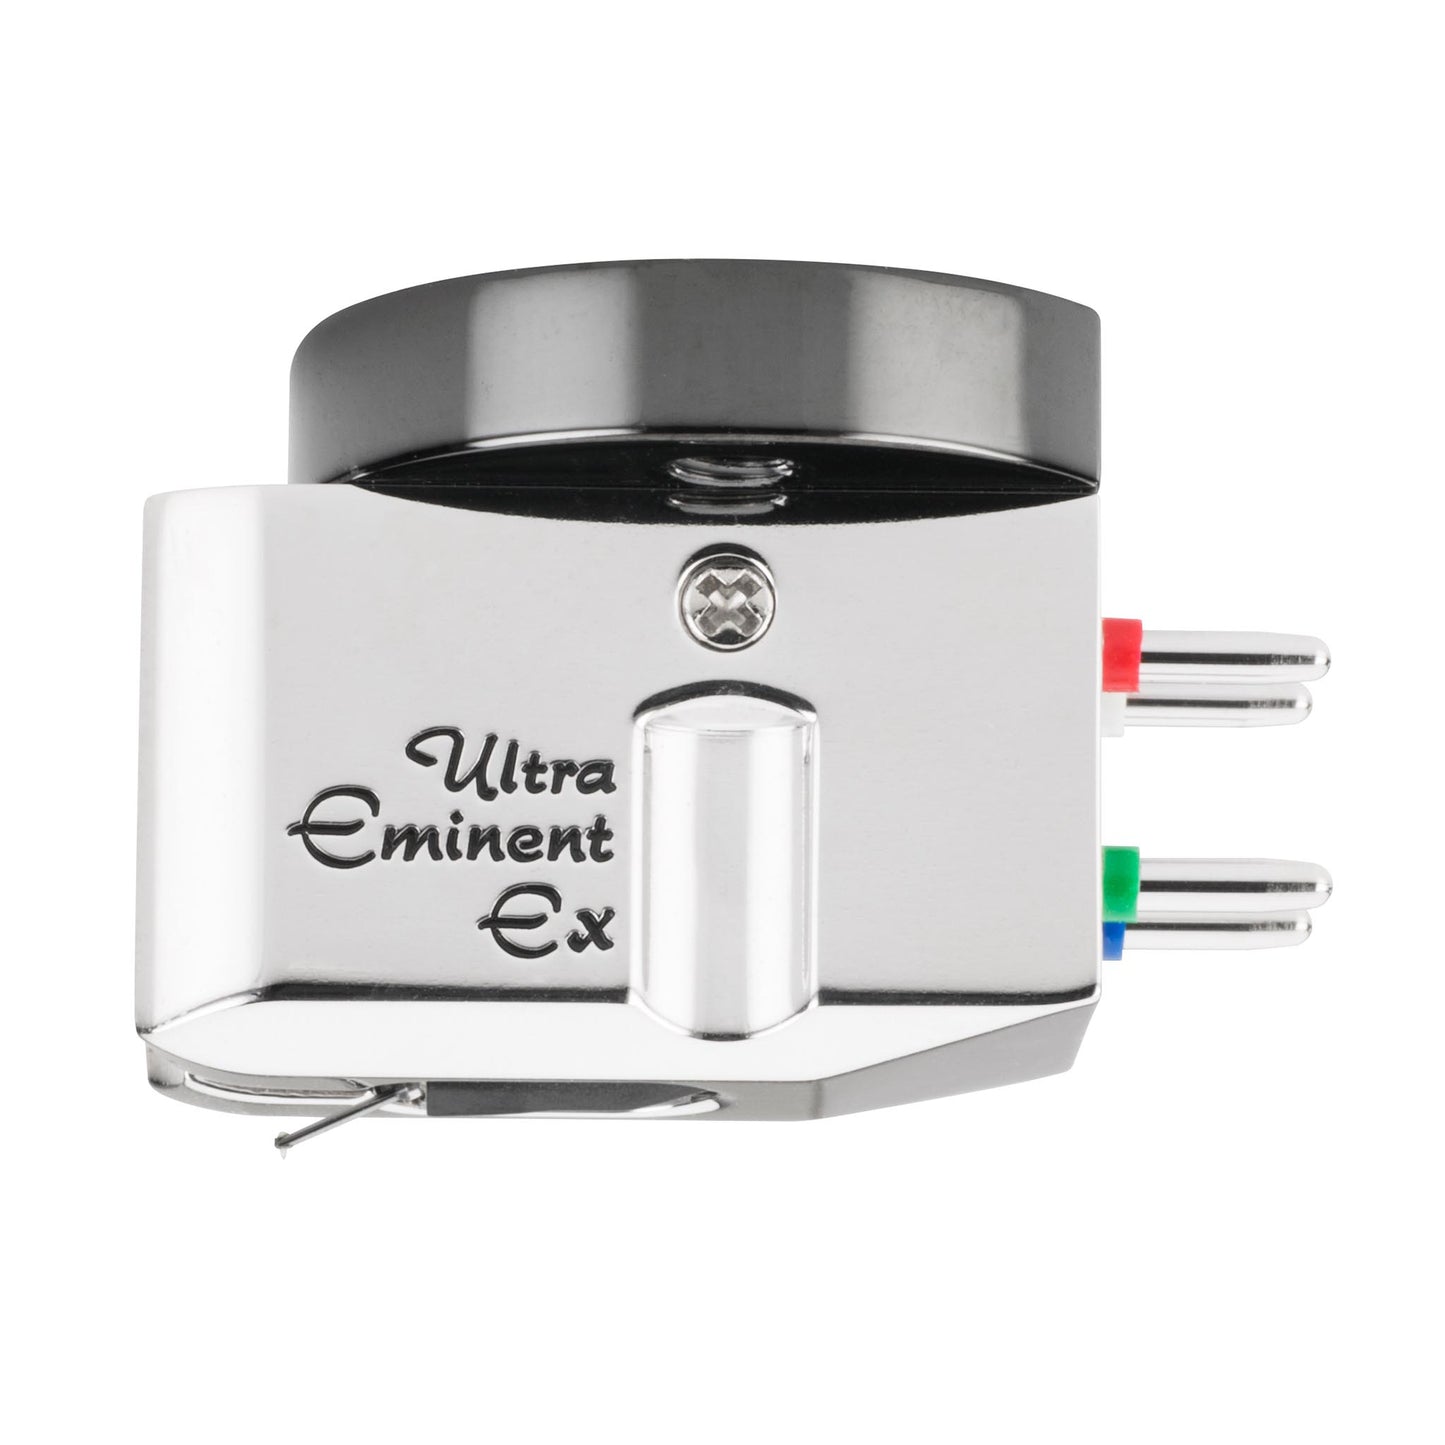 My Sonic Lab Ultra Eminent EX Moving Coil Cartridge